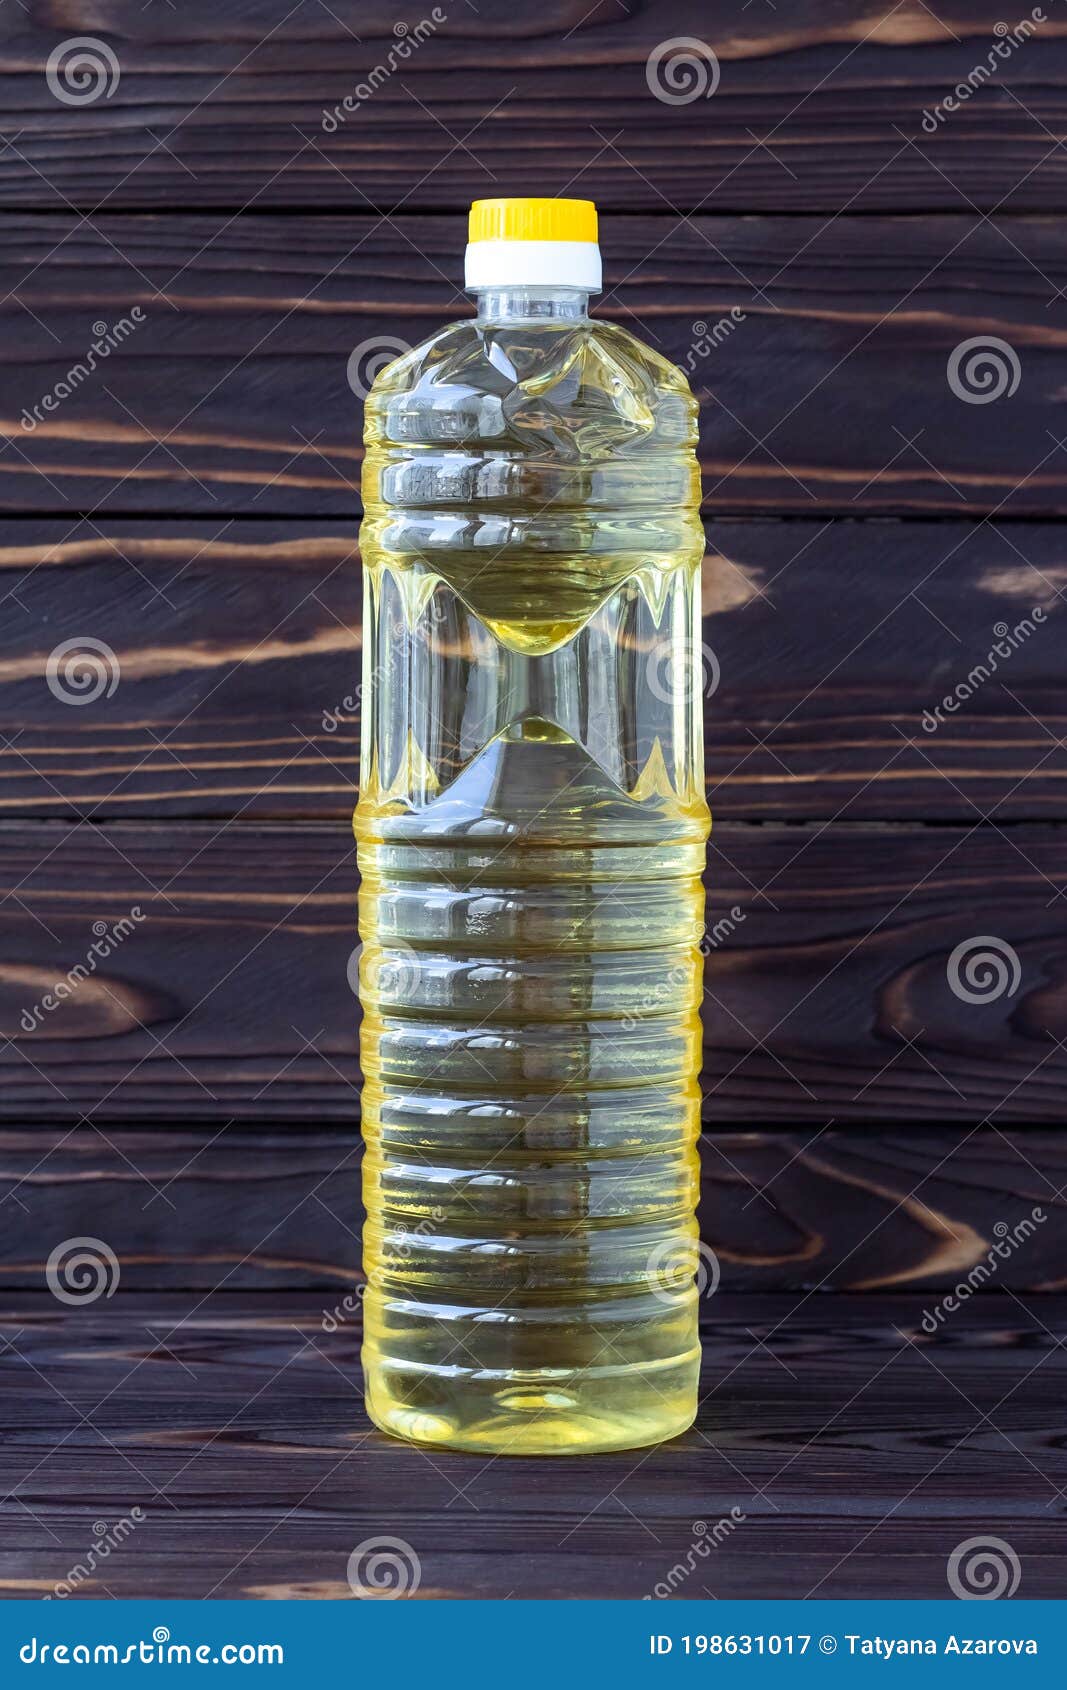 Download 1 382 Transparent Plastic Bottle Vegetable Oil Photos Free Royalty Free Stock Photos From Dreamstime Yellowimages Mockups